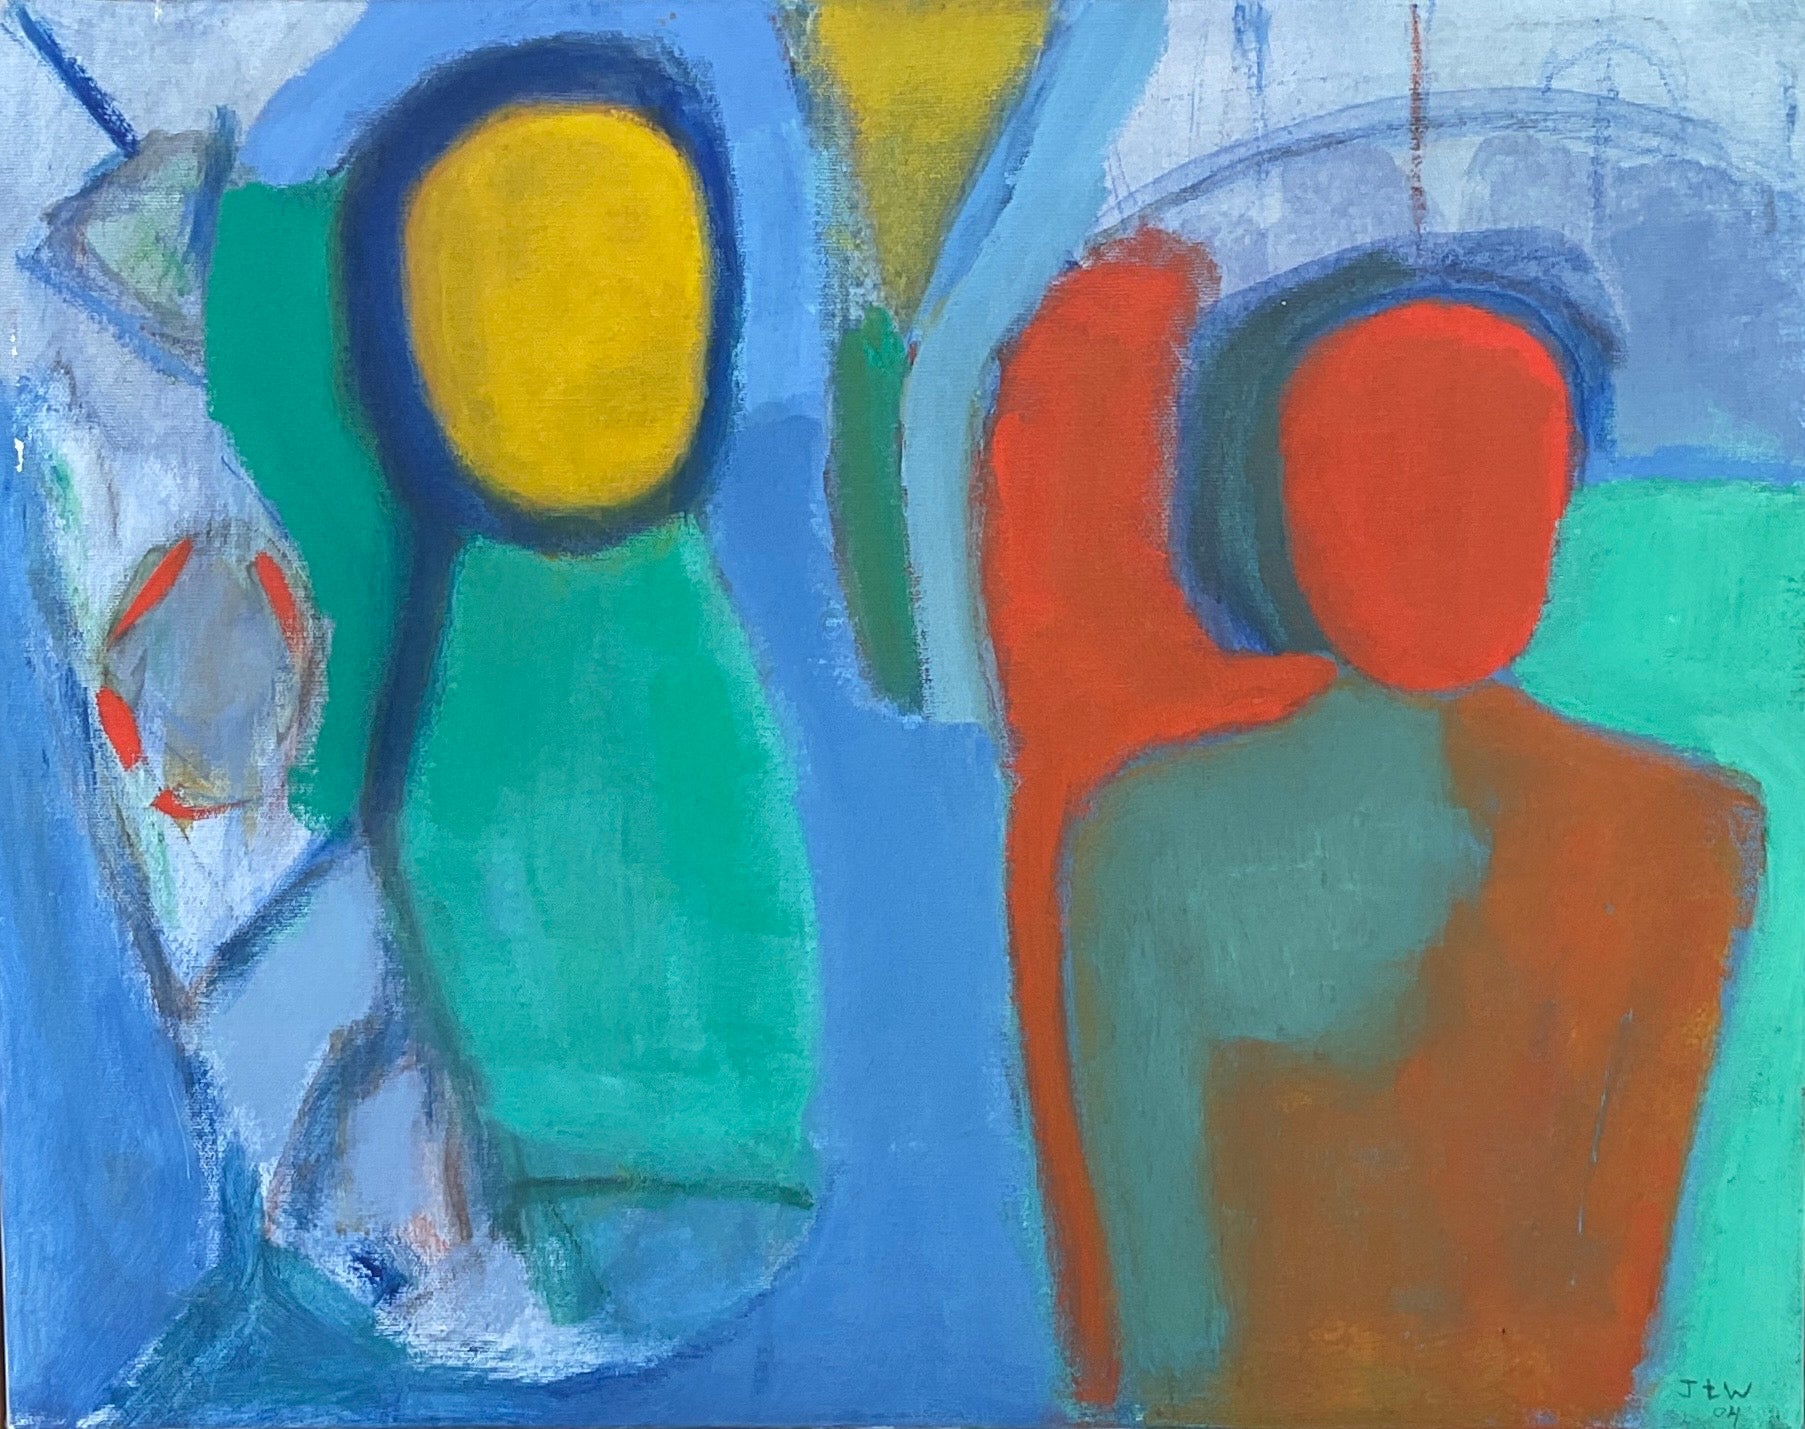 Two figures